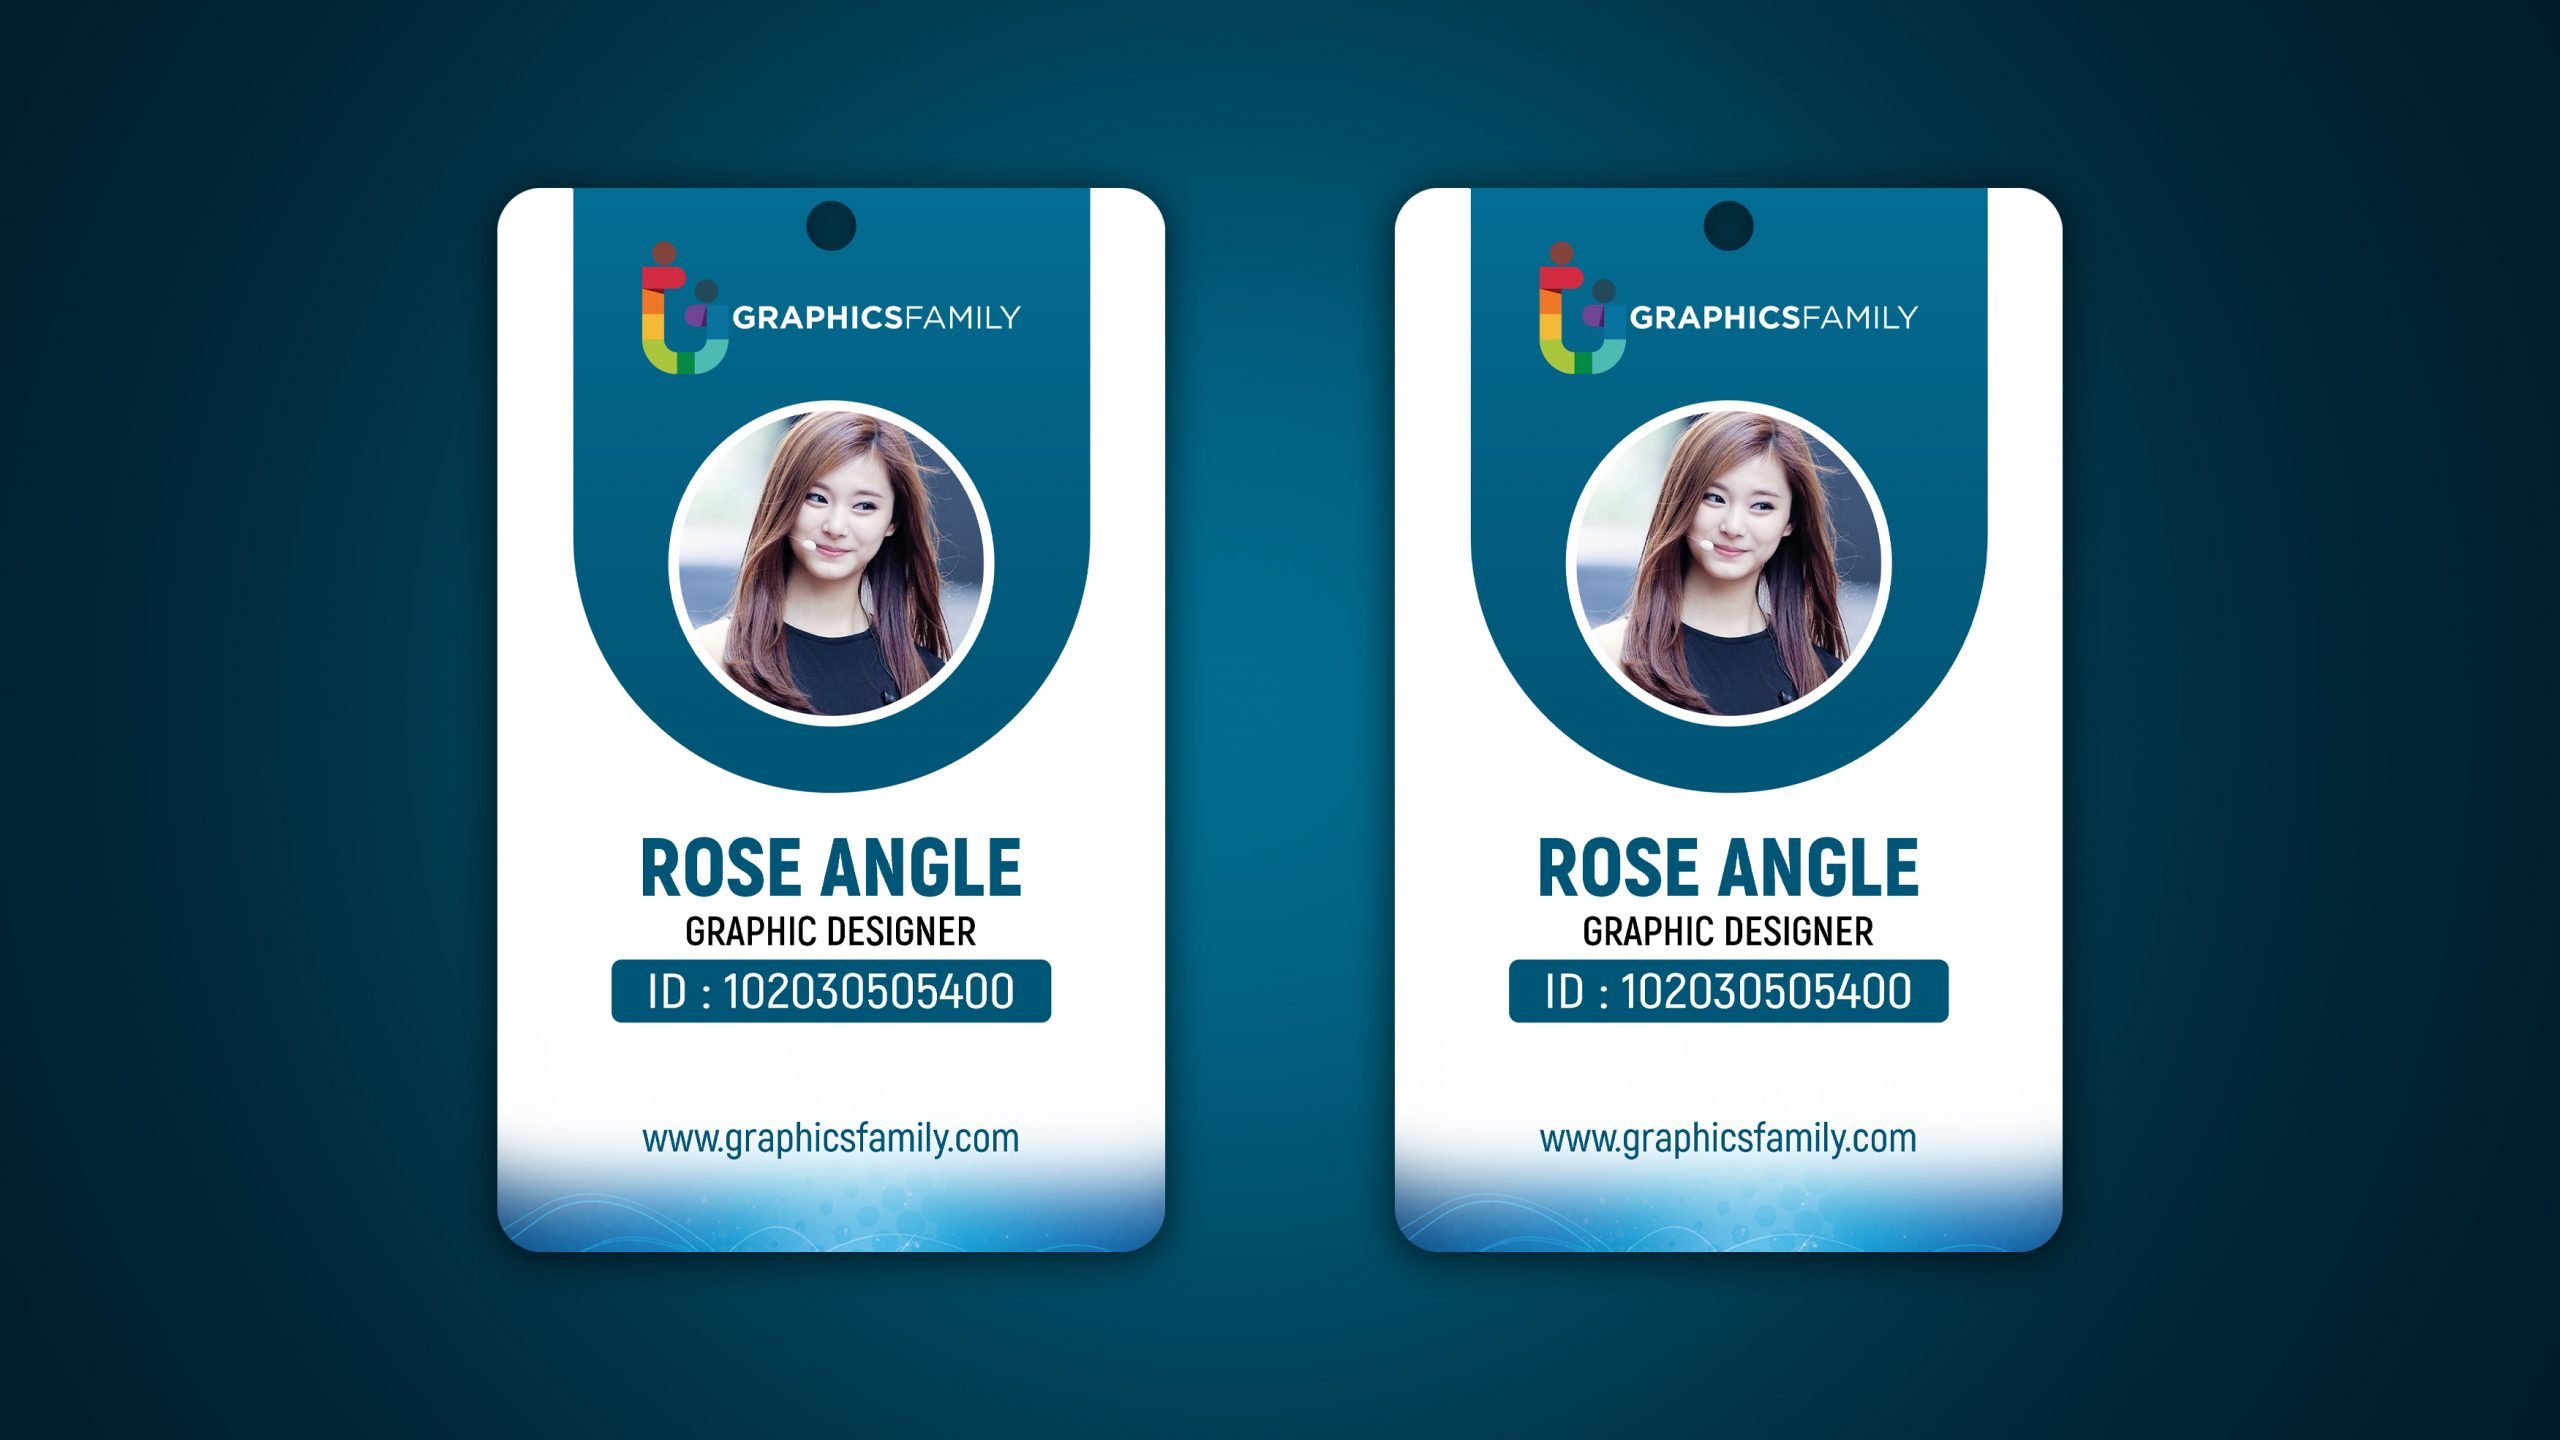 Free Business Card Templates In Psd Format